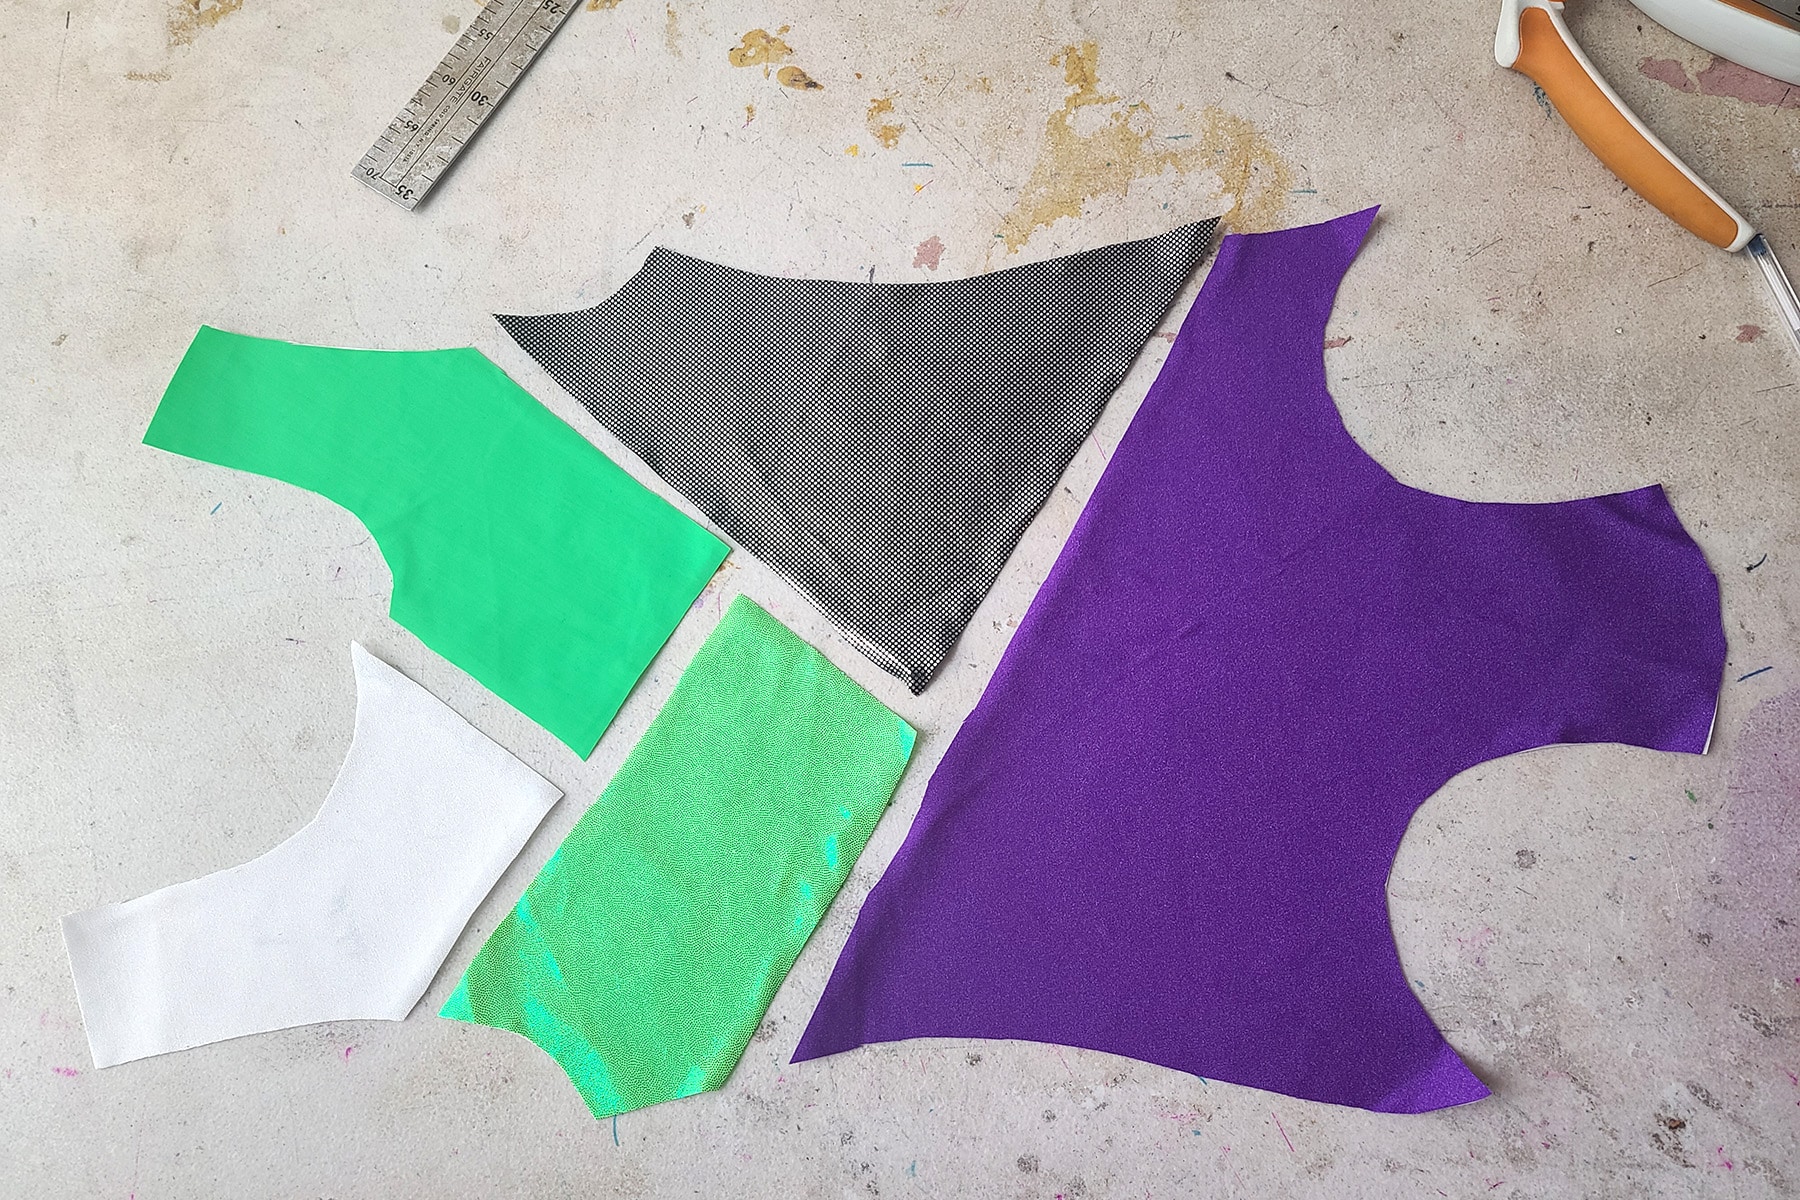 The 5 pieces of leotard front spandex placed together for colour blocking.